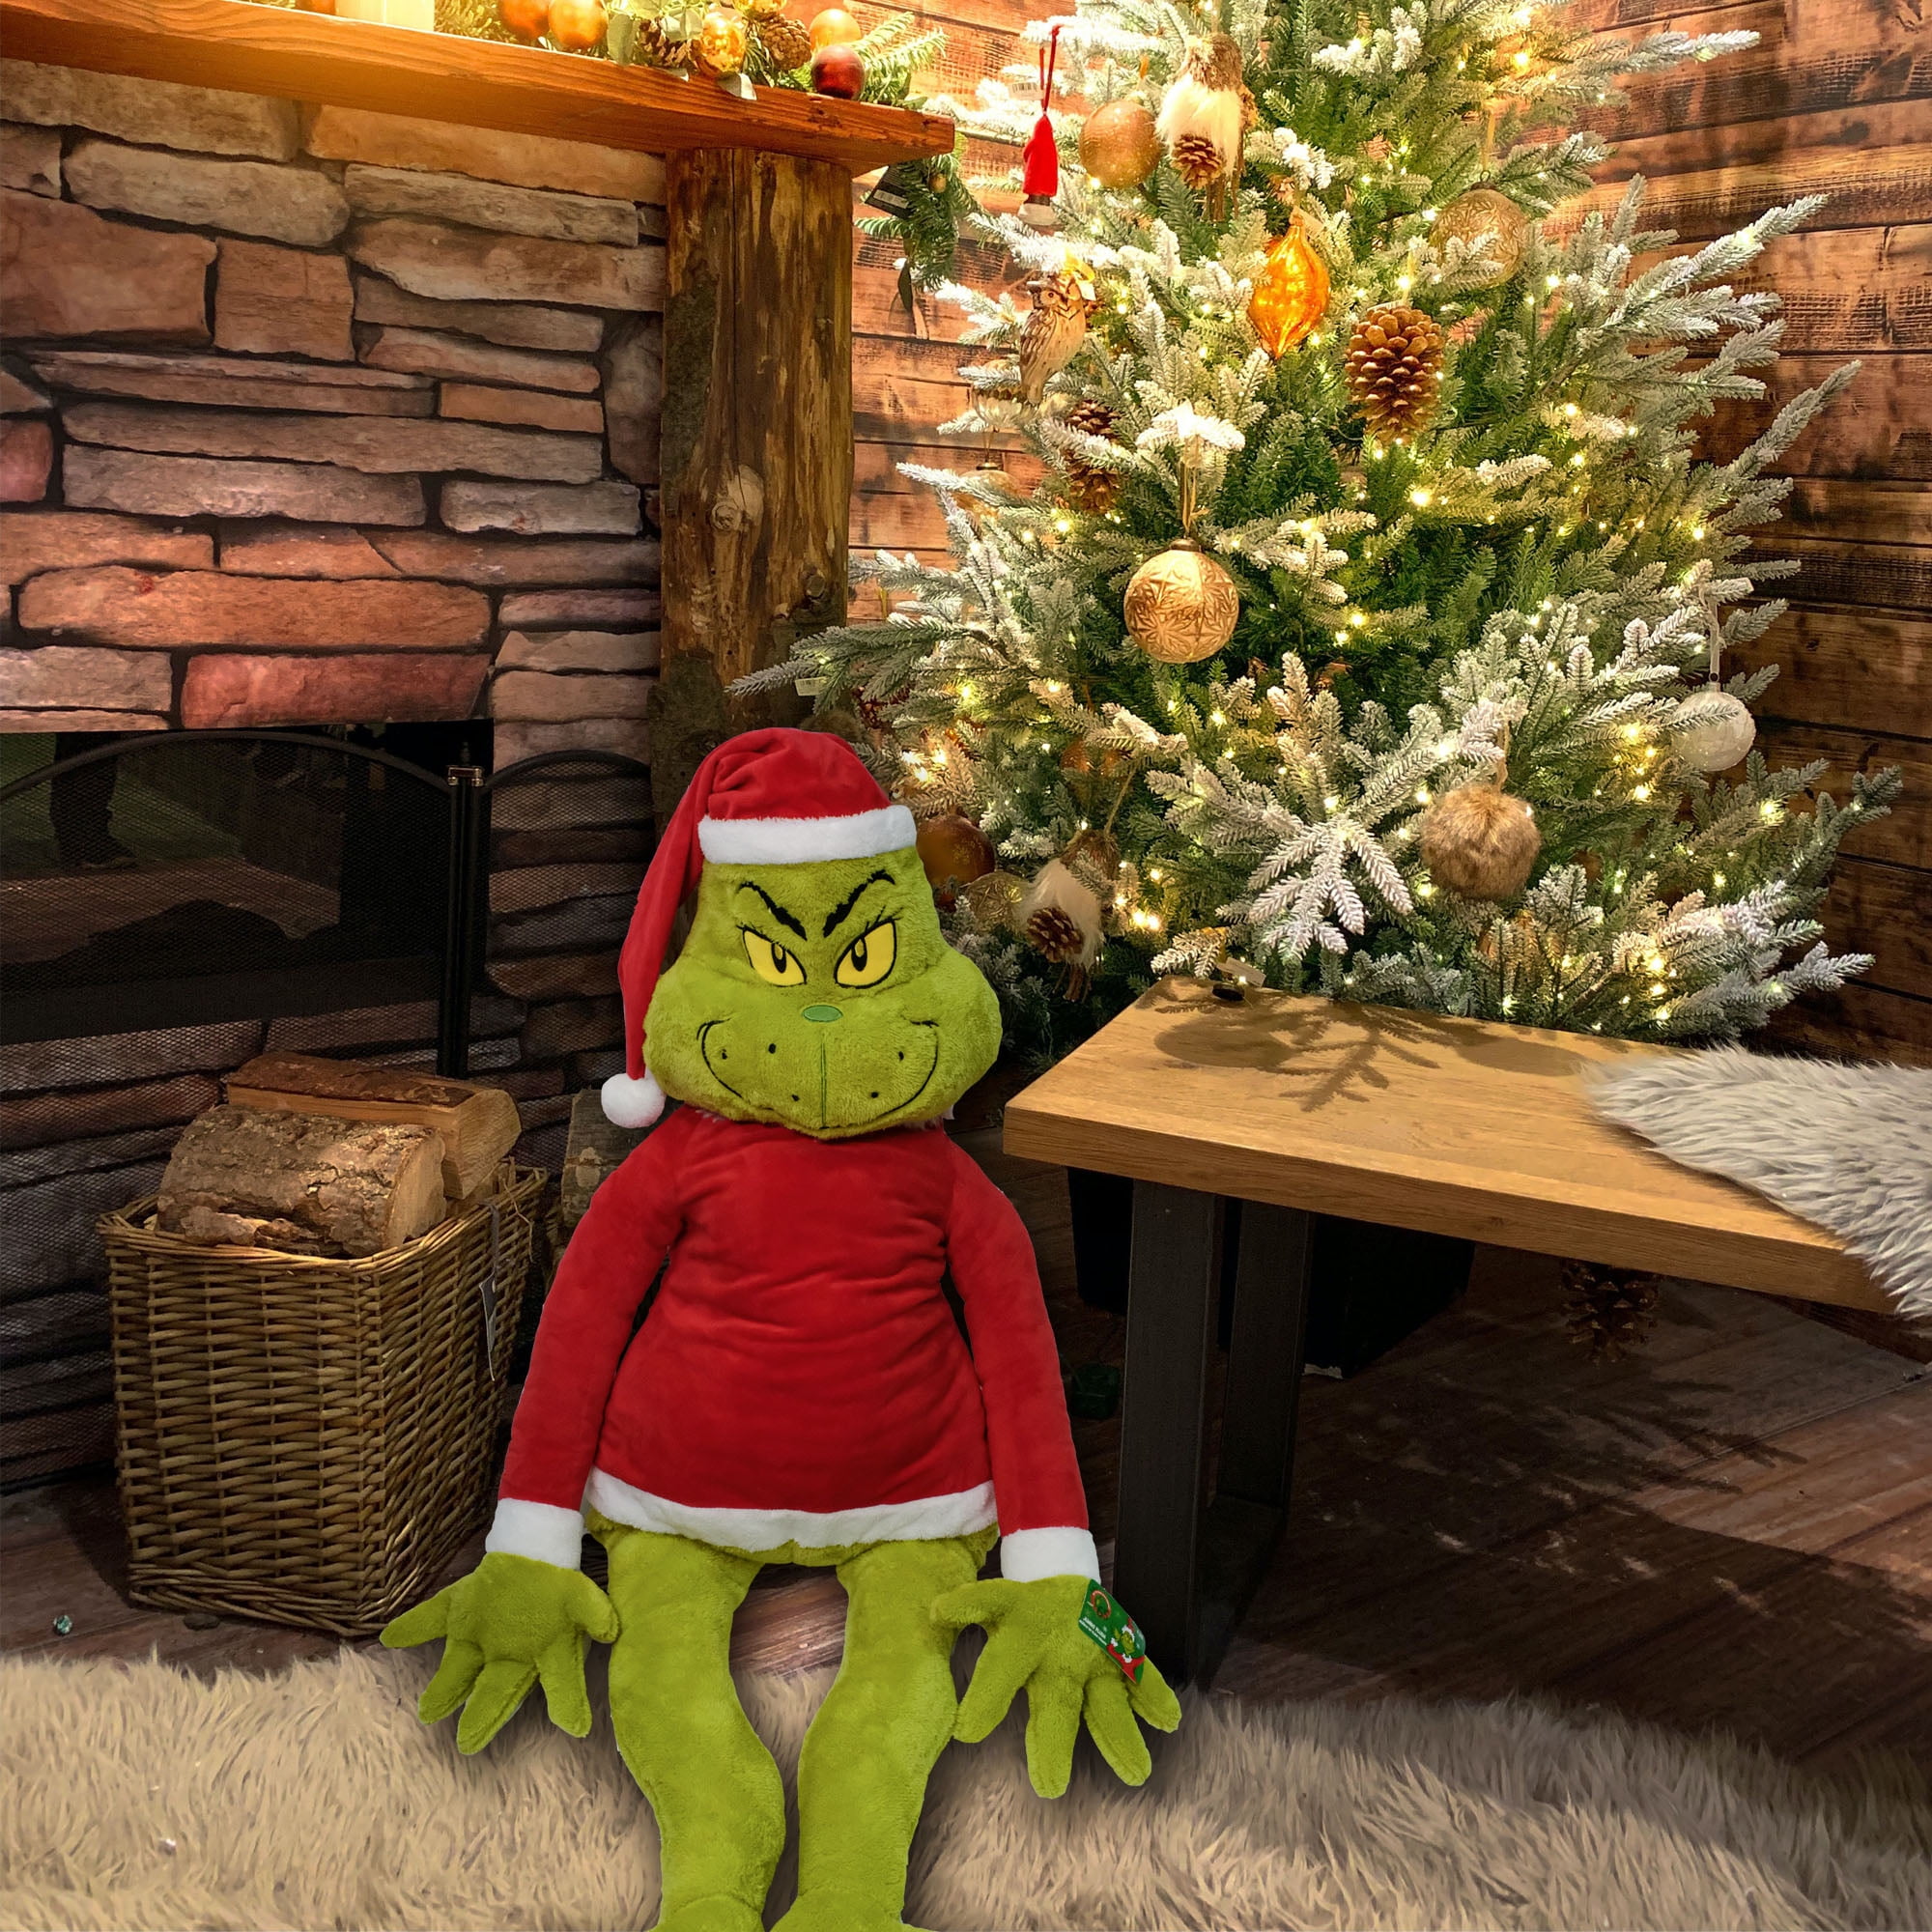 Grinch Christmas Grinch With The Same Plush Cute Toy Plush Pillow Stuffed  Toy